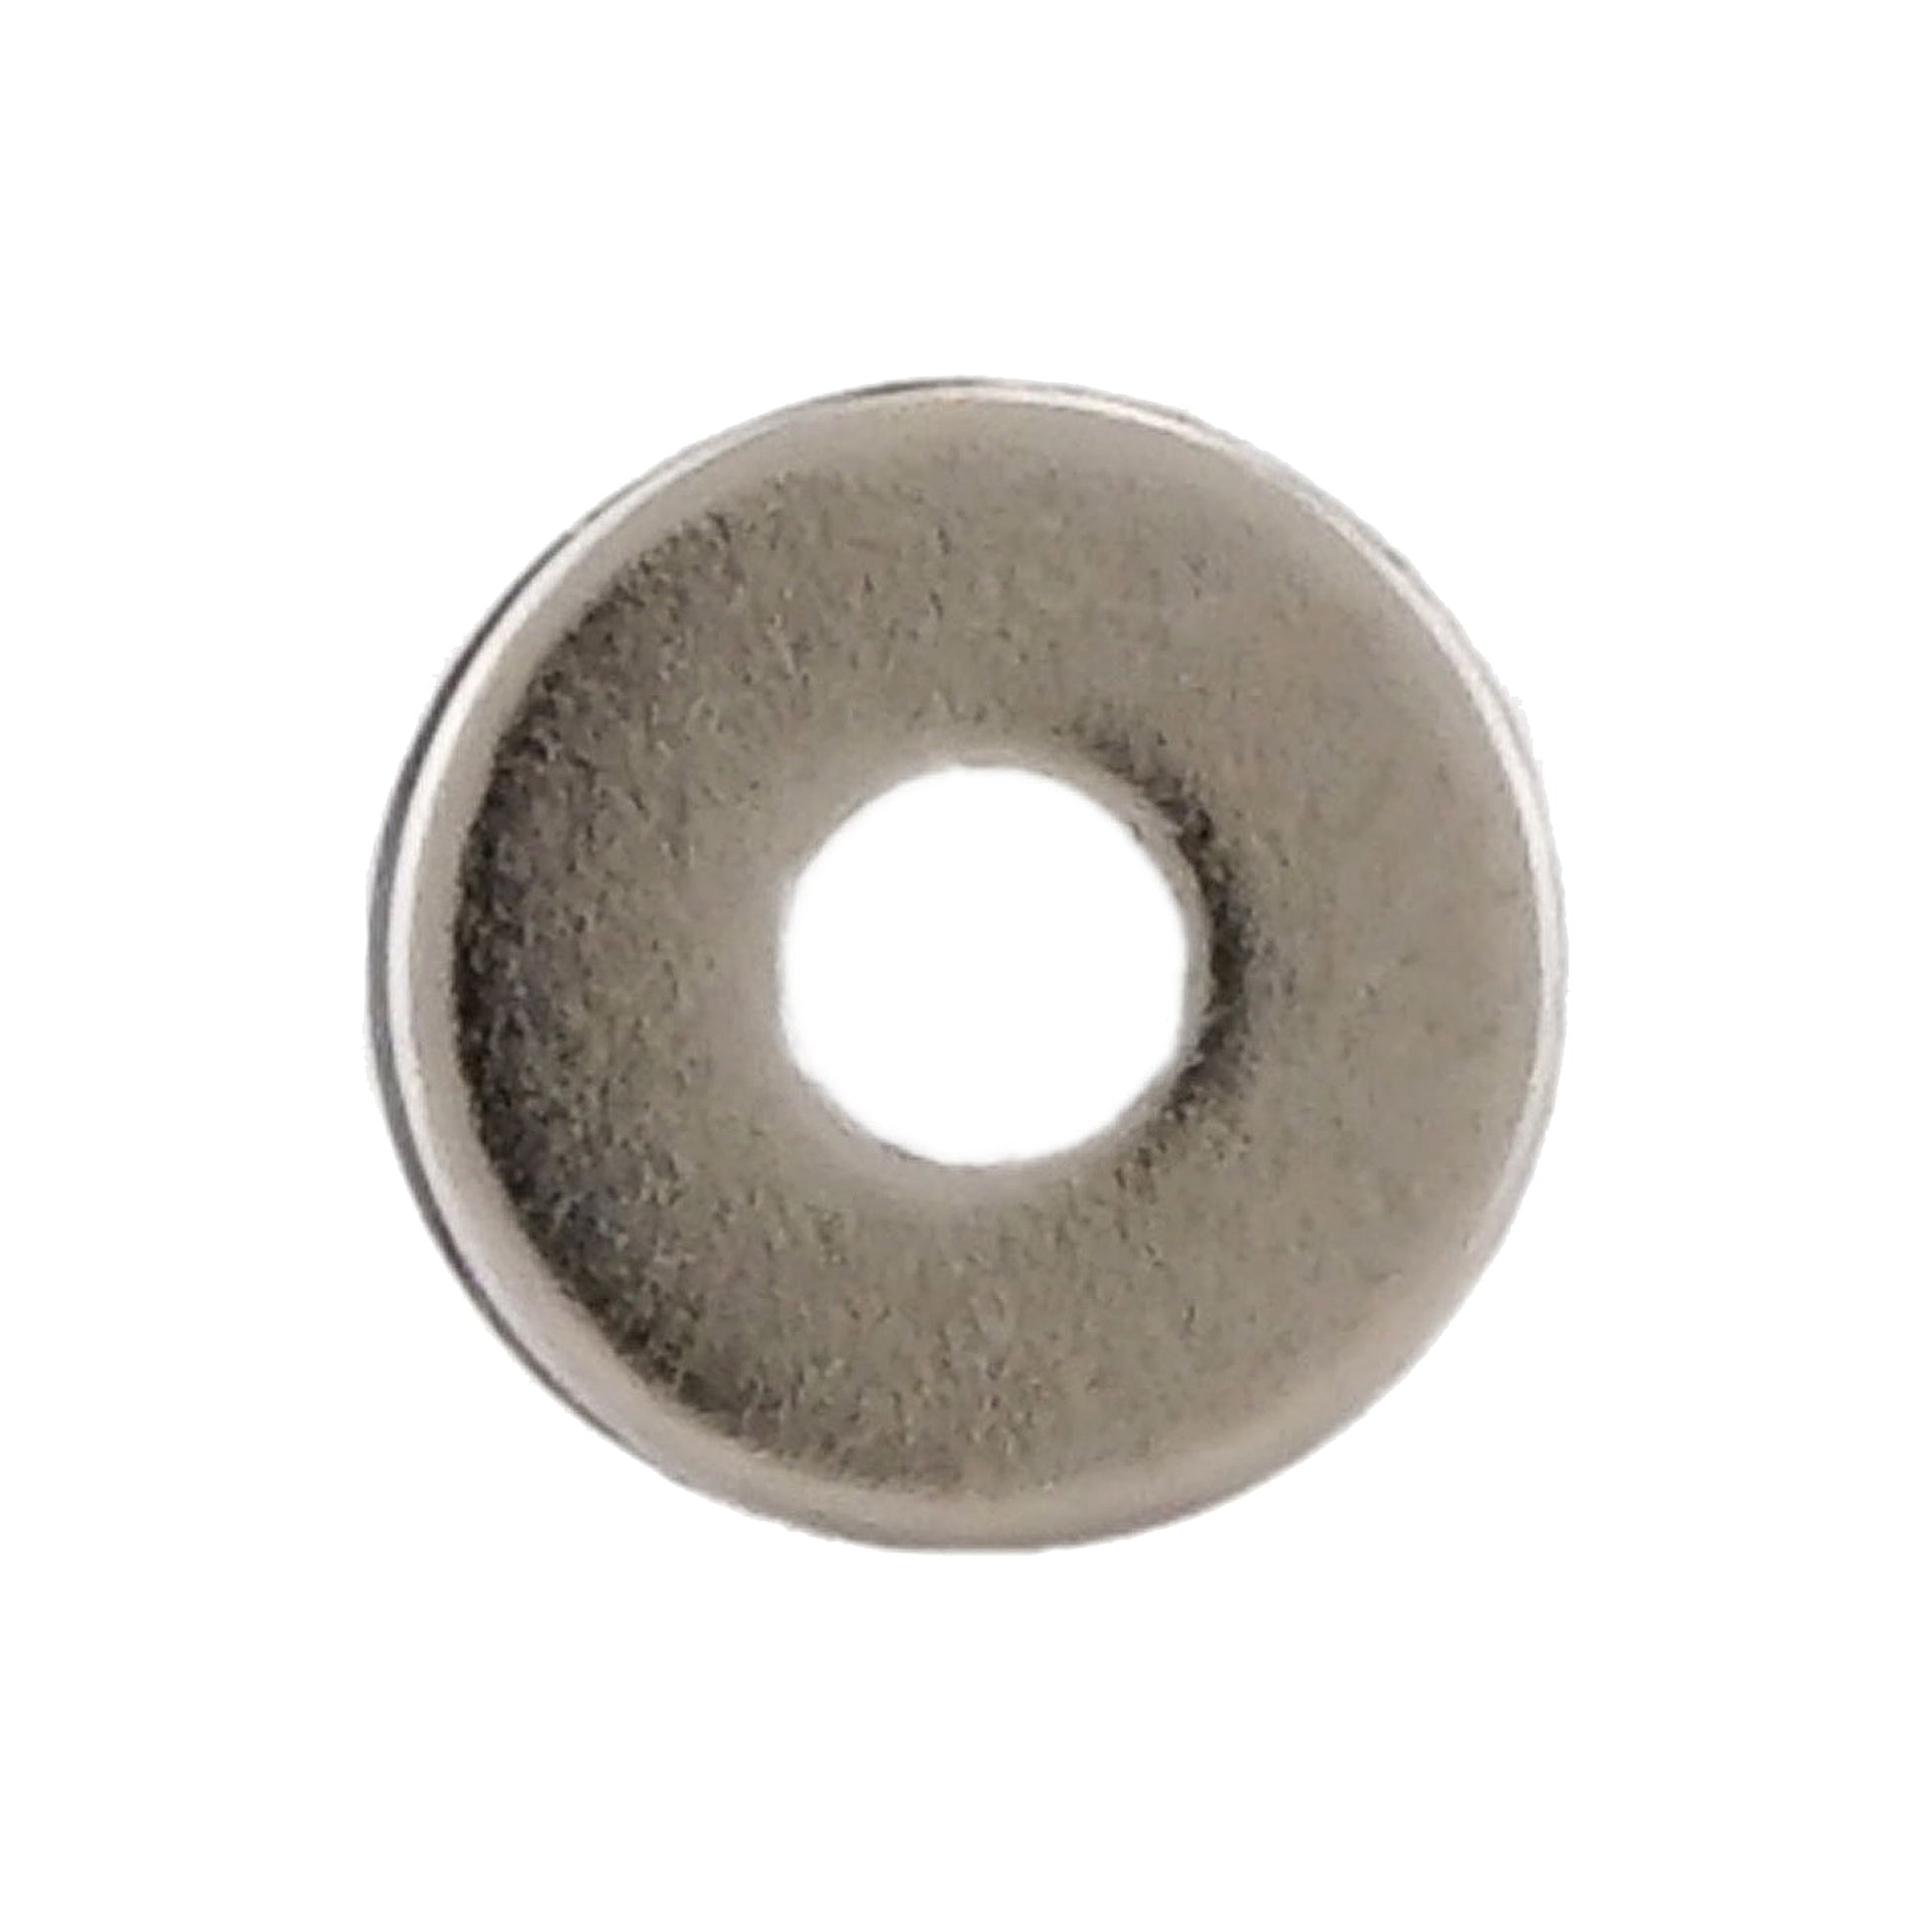 Load image into Gallery viewer, NR003720NS01 Neodymium Ring Magnet - Top View